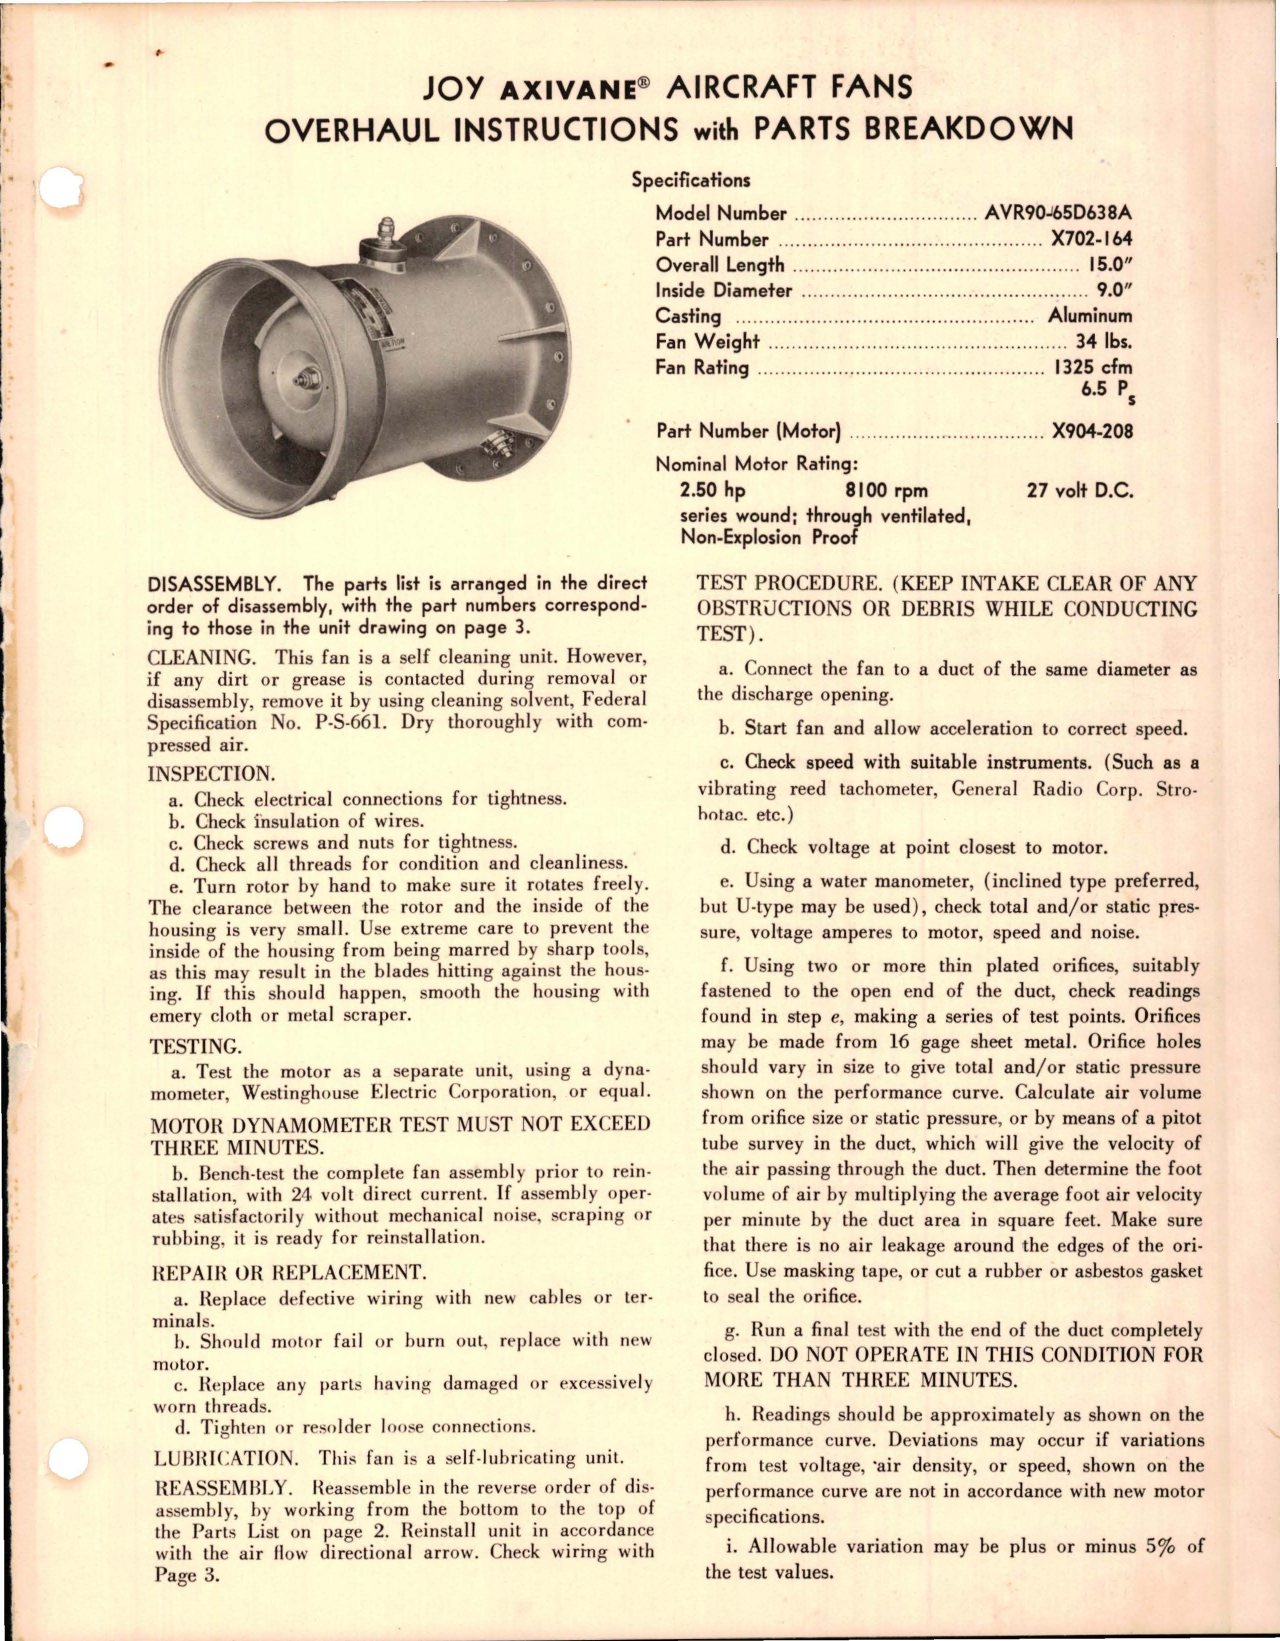 Sample page 1 from AirCorps Library document: Overhaul Instructions with Parts Breakdown for Axivane Aircraft Fans - AVR140-55D851A - Part X702-122A 